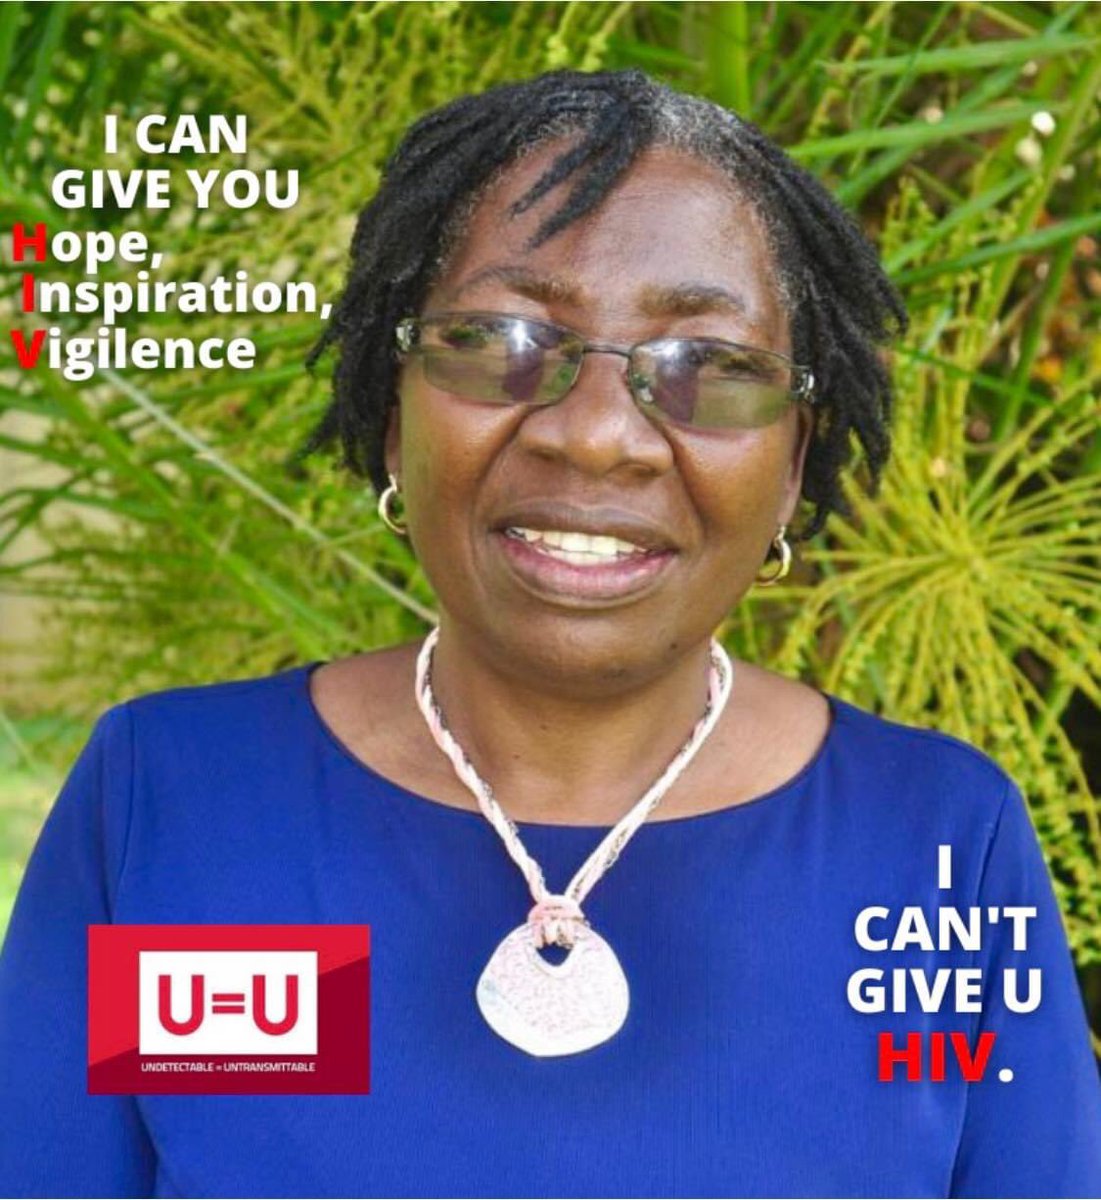 Tariro CAN give you so much; but Tariro CAN’T GIVE U HIV!
#ICanGiveU
#UequalsU #ICantGiveUHIV 
#LovePositiveWomen
#ScienceNotStigma #FactsNotFear